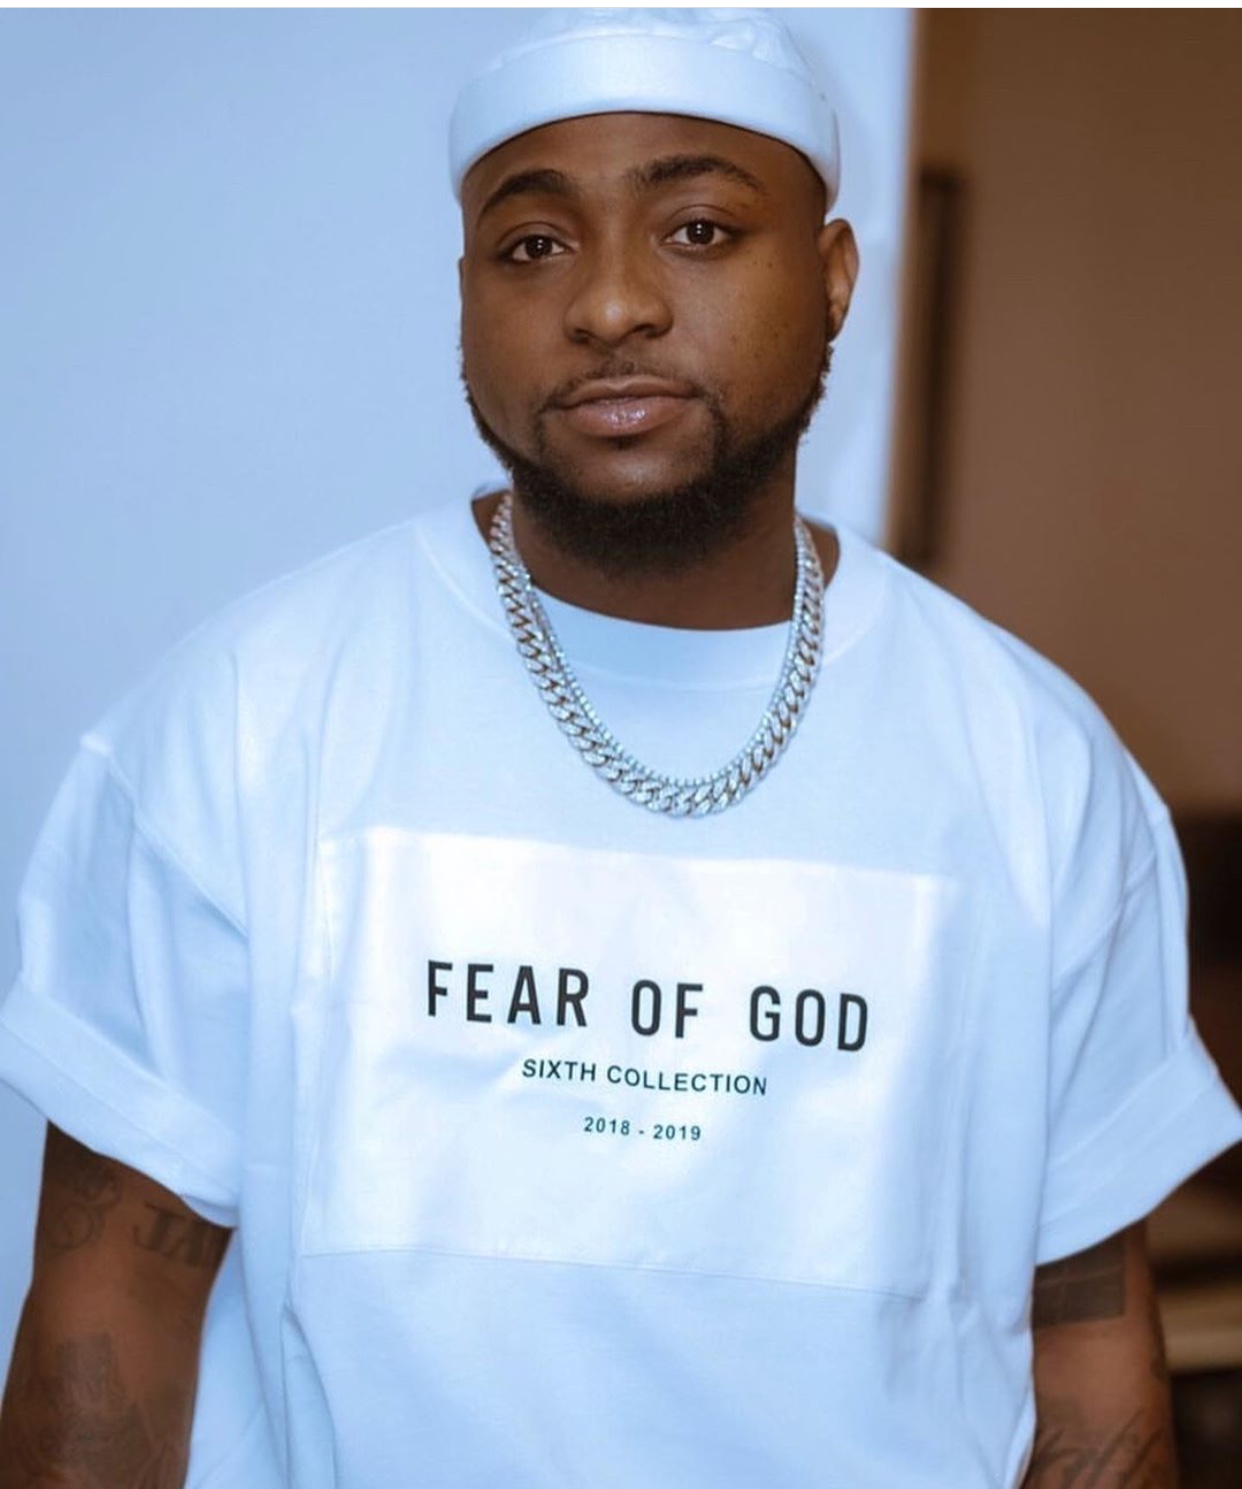 Moment Bouncer stopped Davido from running away